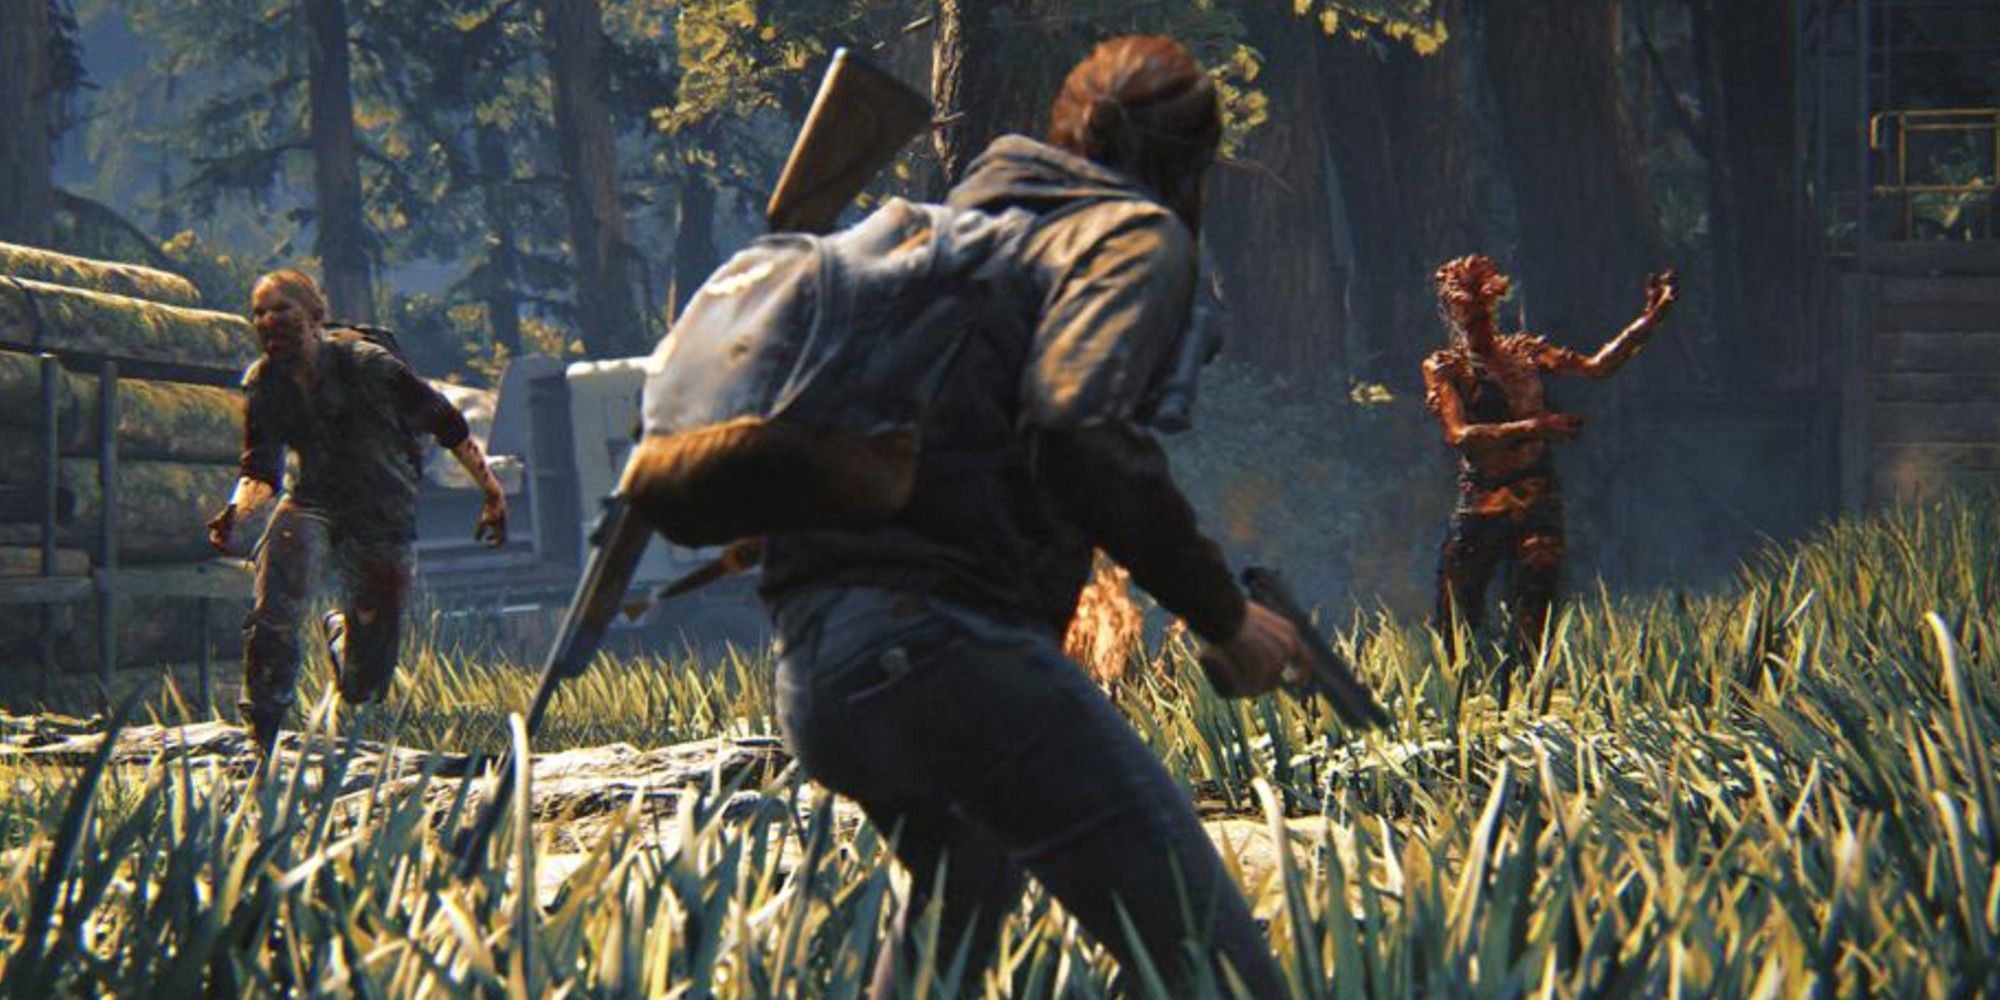 Ellie fighting infected in The Last of Us 2.